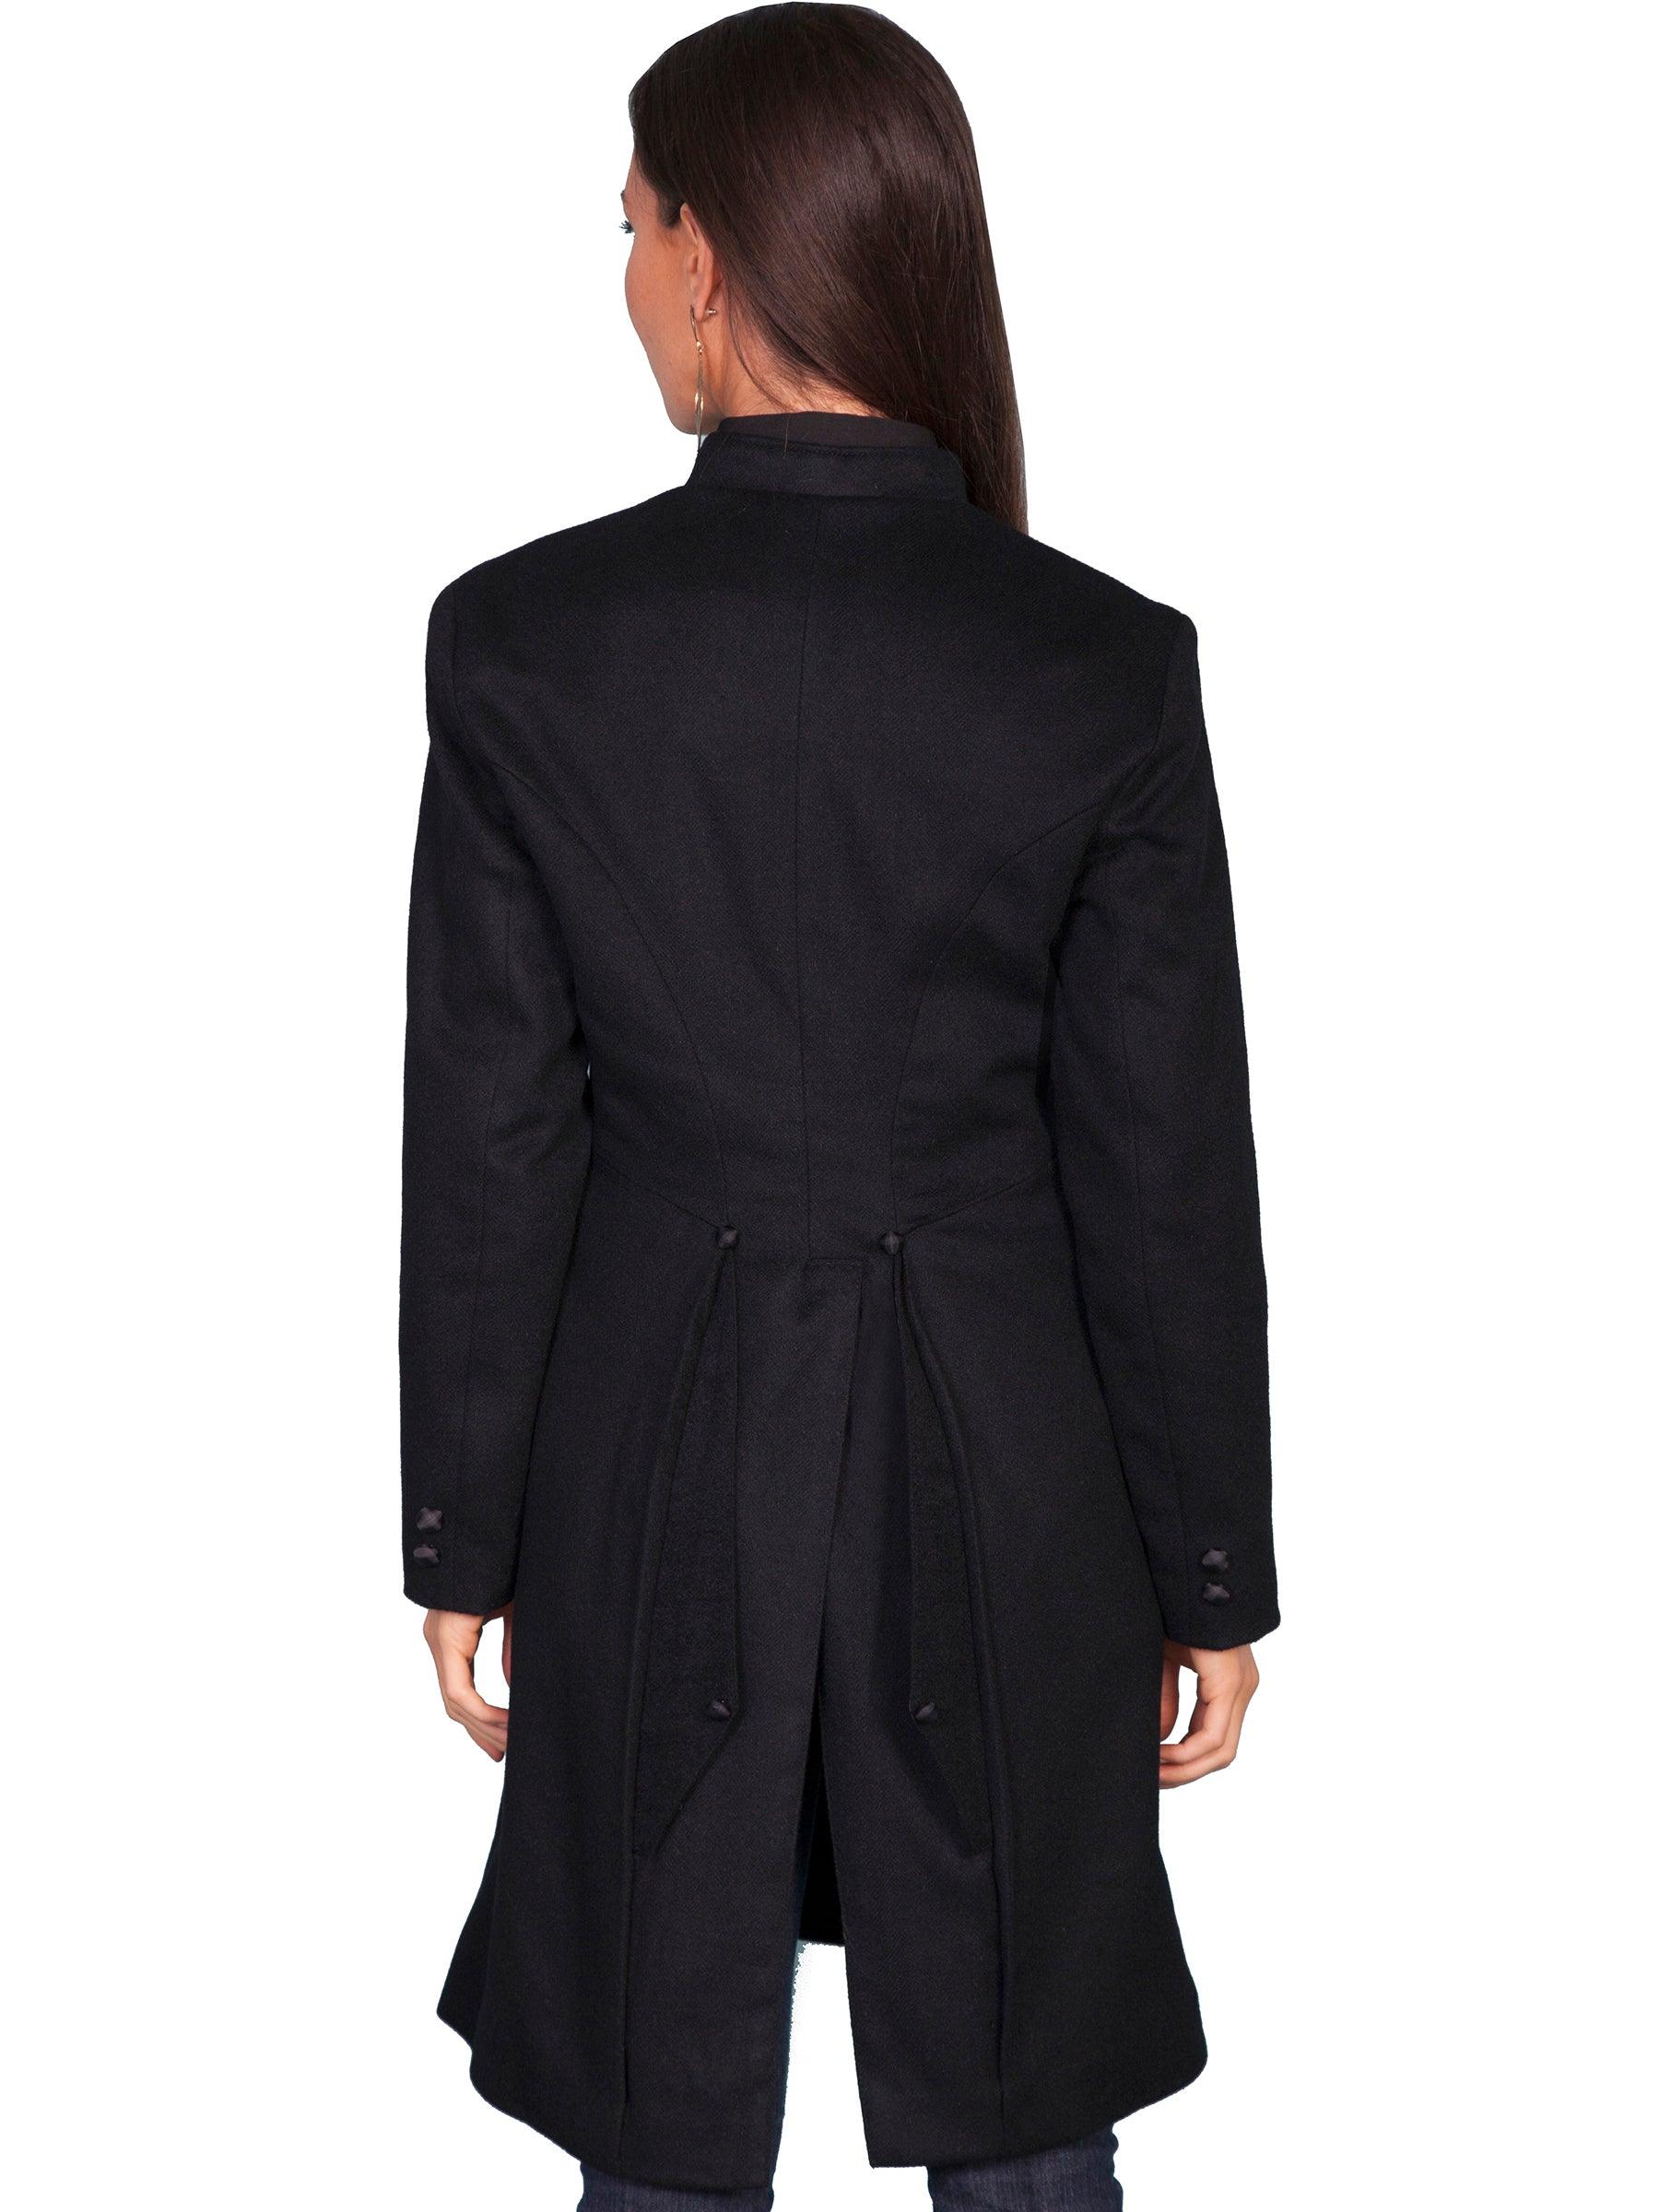 Scully BLACK LADIES EMBROIDERED FROCK COAT - Flyclothing LLC